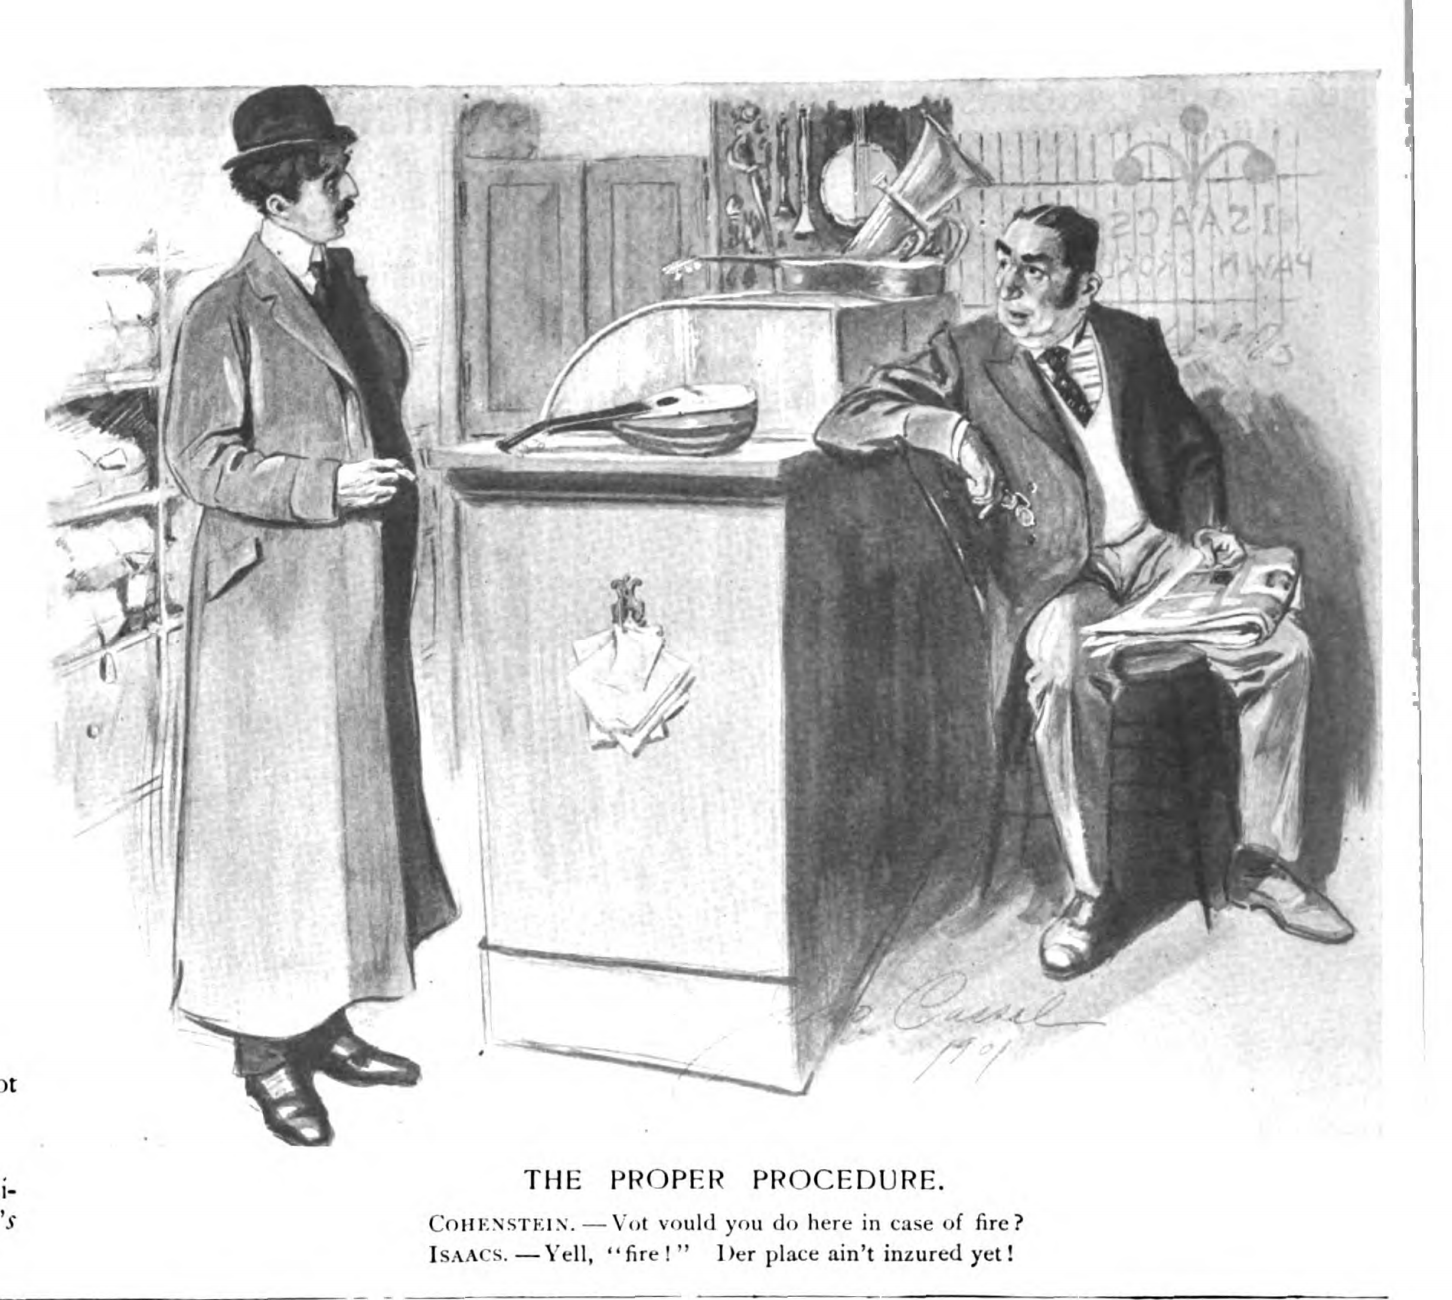 political cartoon, June 19 1901, showing two men having a discussion in a store